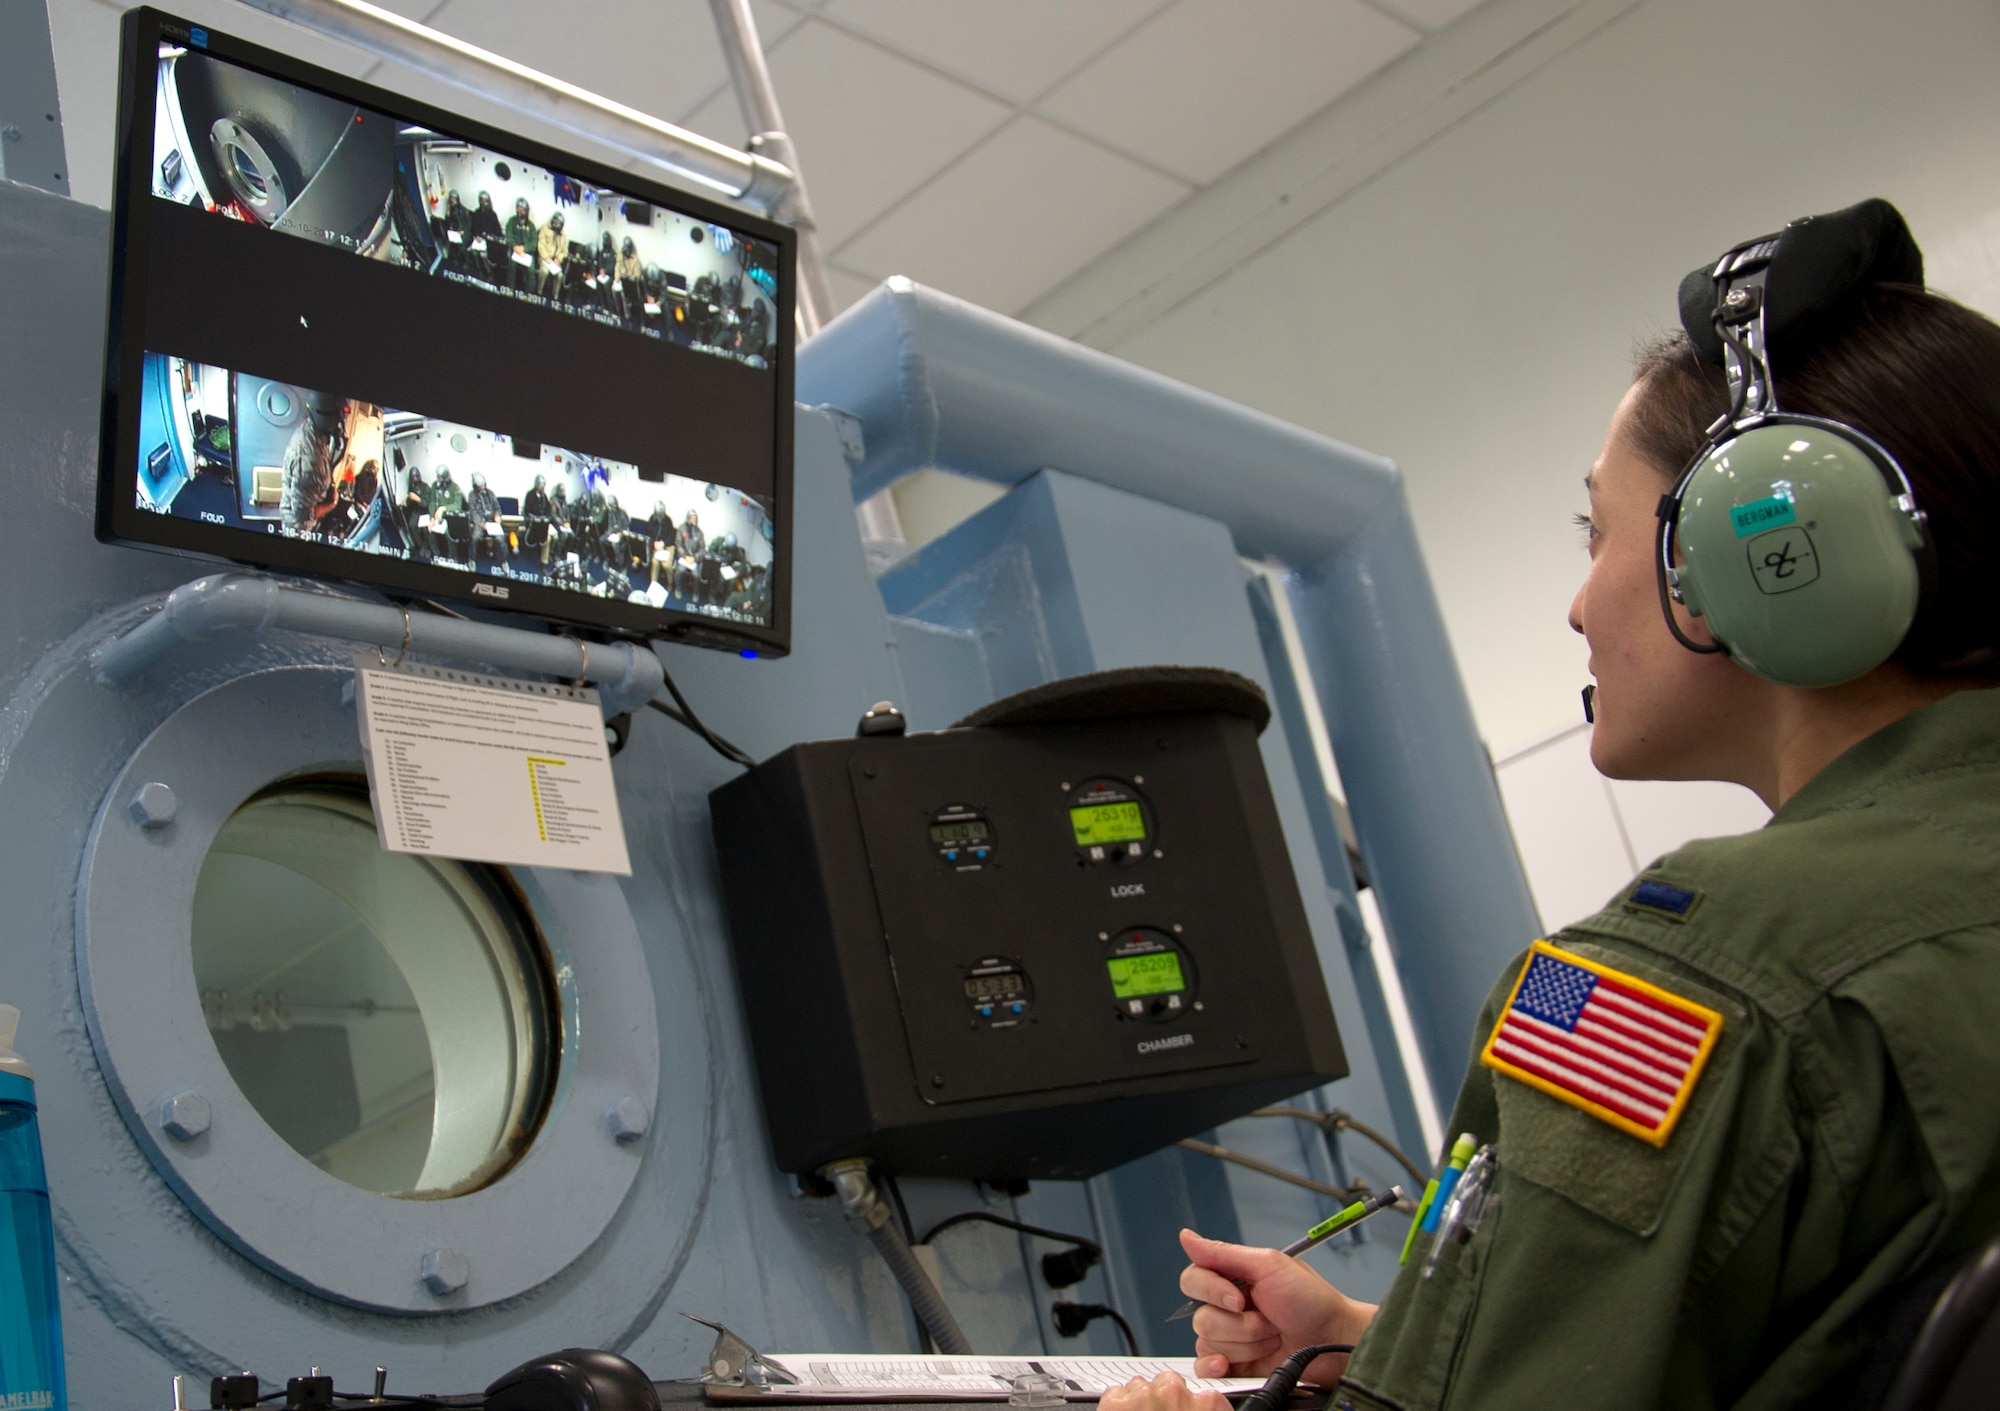 1st Lt. Alethea Bergman, 779th Aerospace Medical Squadron operations chief, monitors the altitude chamber’s communications systems and the behavior of the students as they train in an enclosed altitude chamber March 16, 2017 at Joint Base Andrews, Md. From outside the chamber, she also kept watch on the amount of time the students were exposed to varying levels of air pressure without wearing their oxygen masks.  (U.S. Air Force photo by Staff Sgt. Joe Yanik)